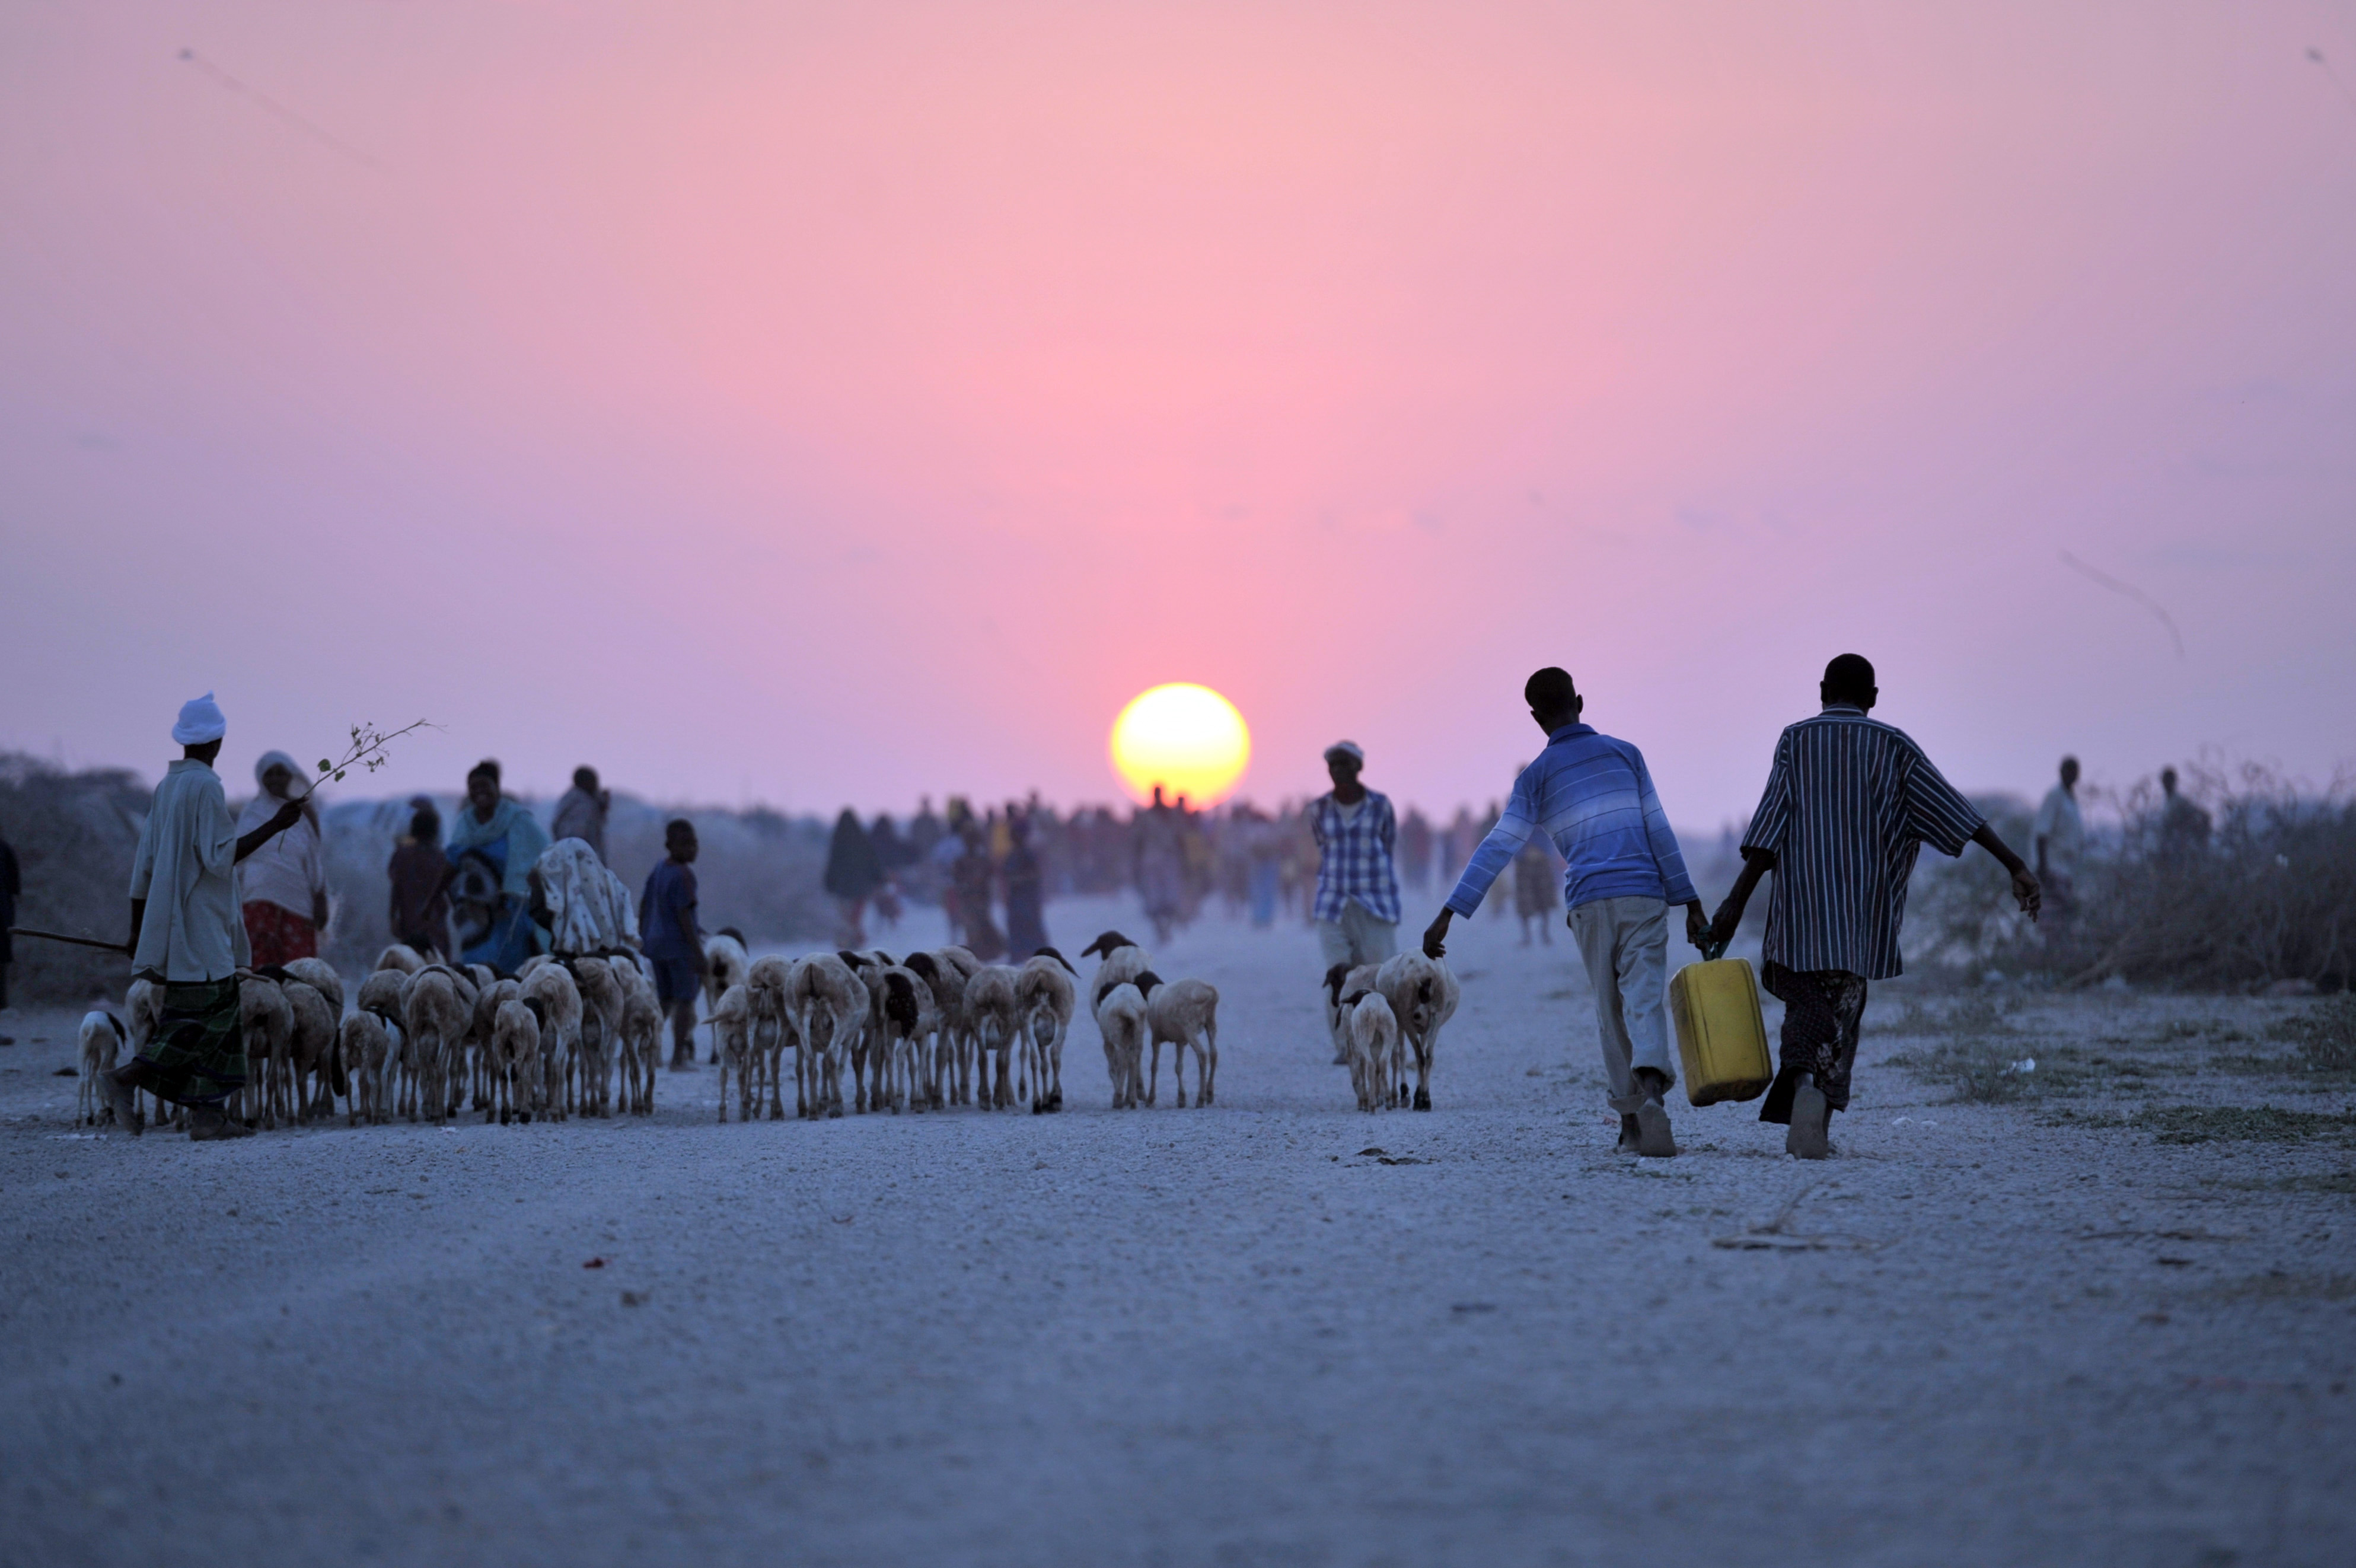 Two boys carry a water canister next to a flock of sheep near Jowhar, Somalia.